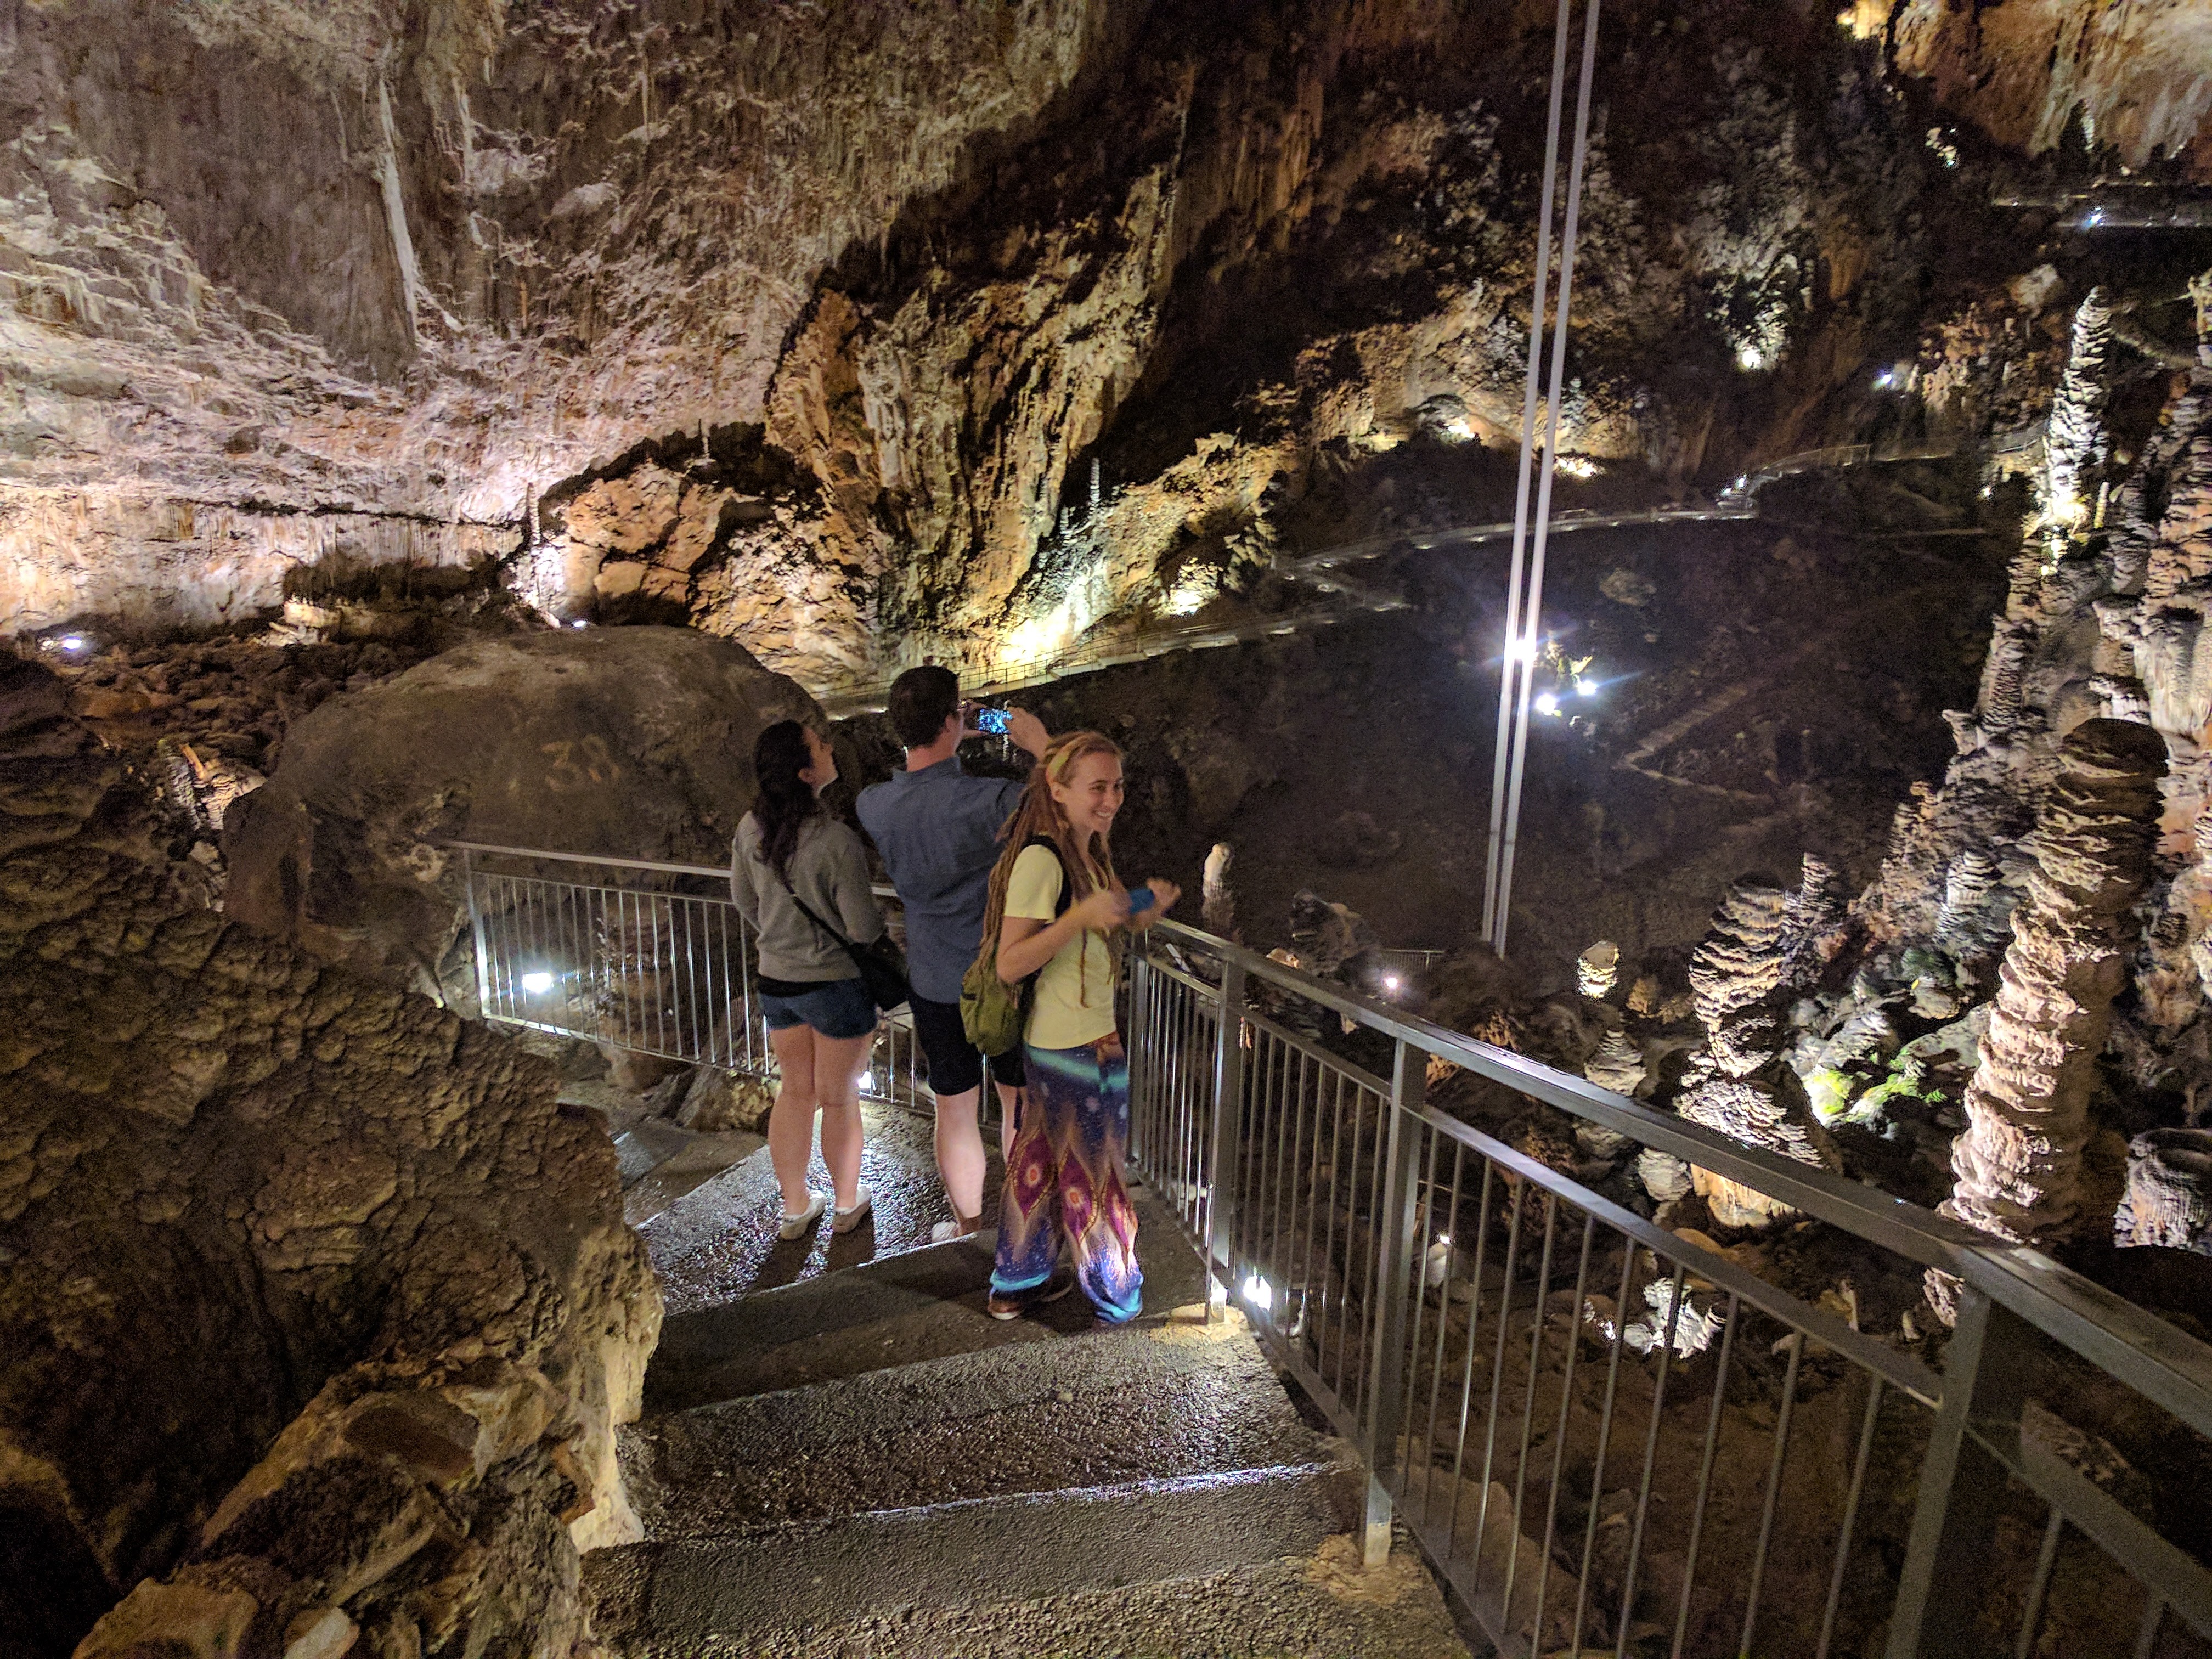 Some people on some steps leading into a giant cave